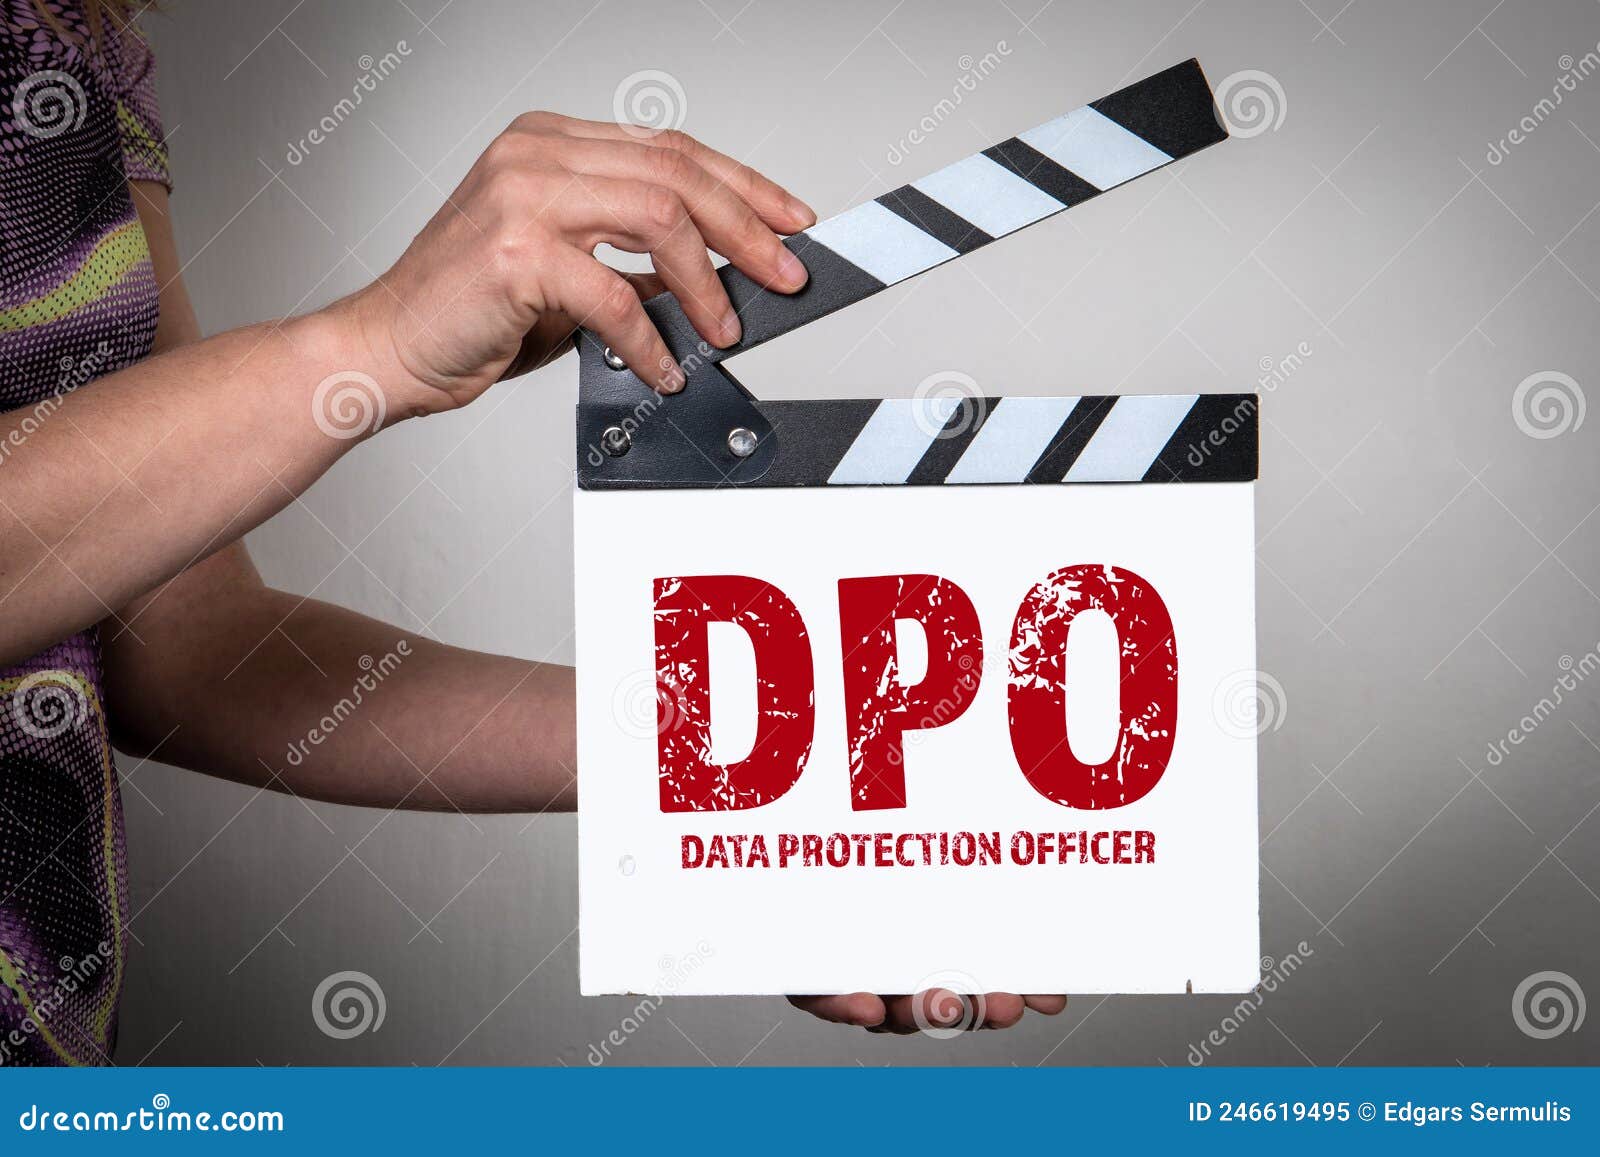 dpo data protection officer concept. female hands holding movie clapper